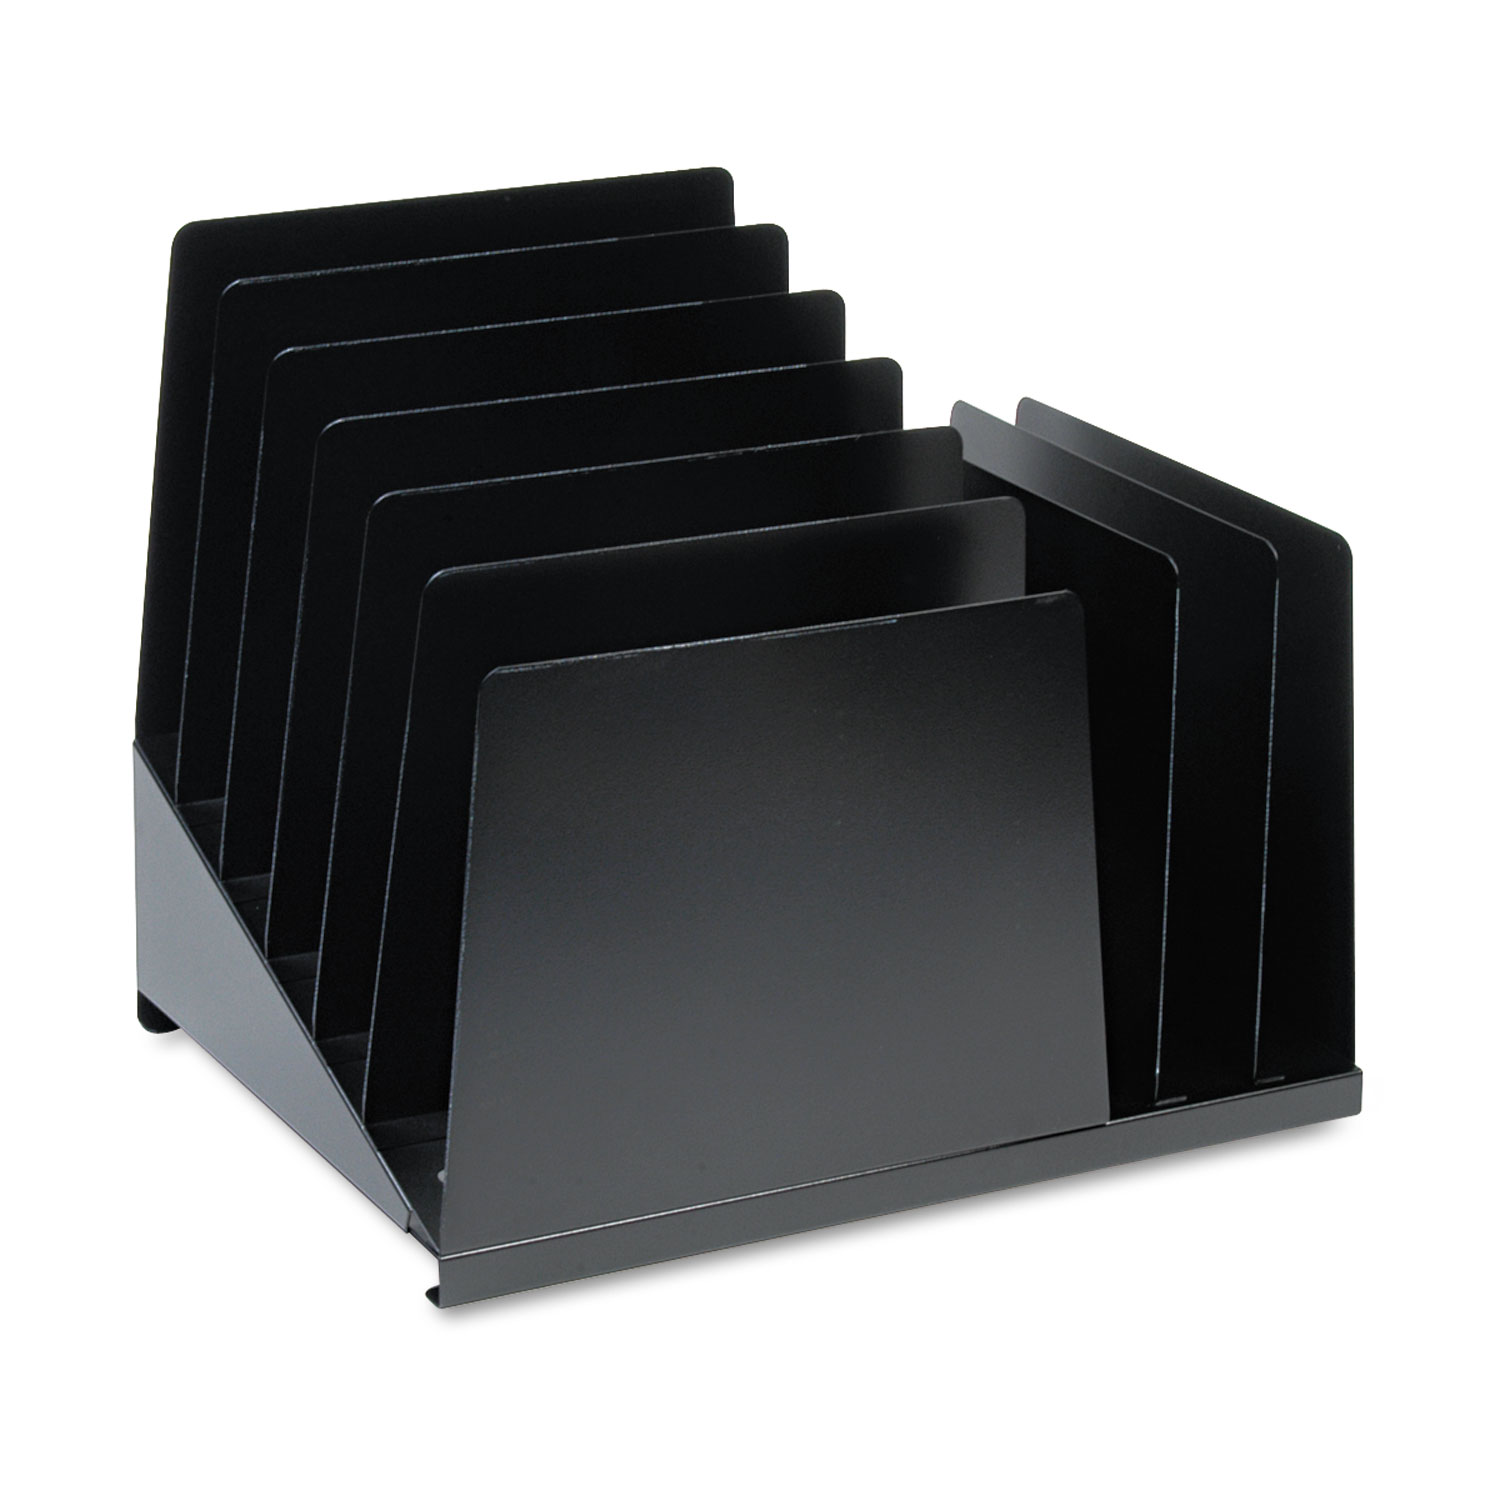 Slanted Combination File, Eight Sections, Steel, 15 1/4 x 11 x 12 3/4, Black